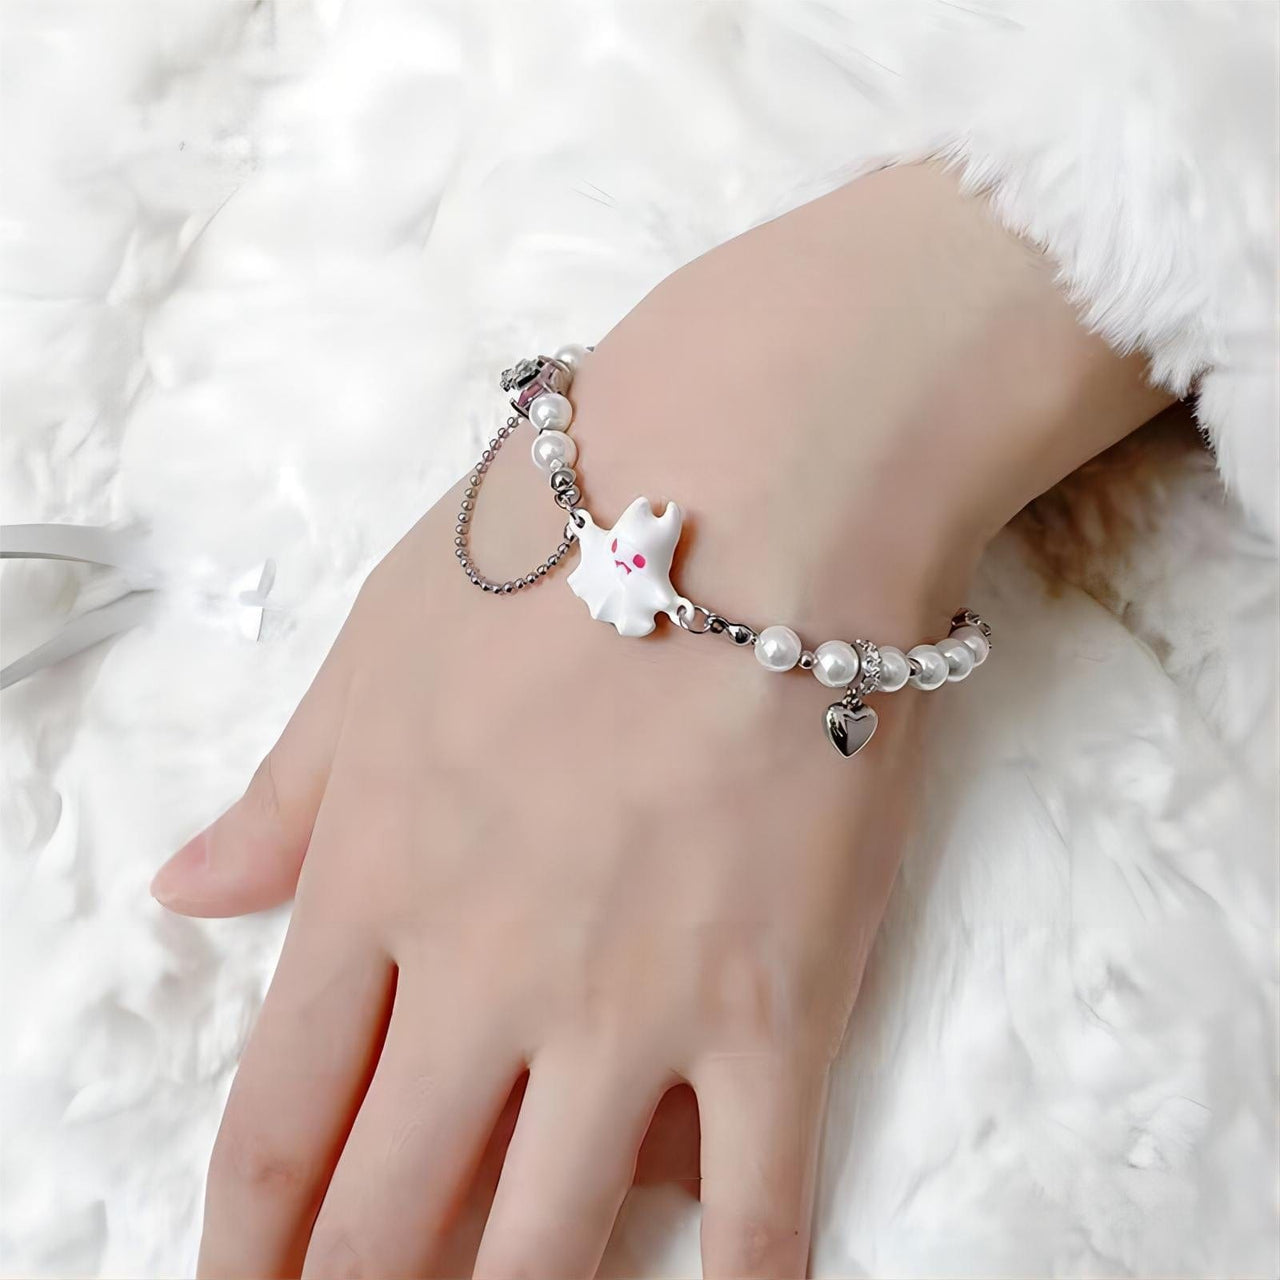 GZ314 - Silver Color Bracelet with Black Flowers - Charm Jewelry | Touchy  Style